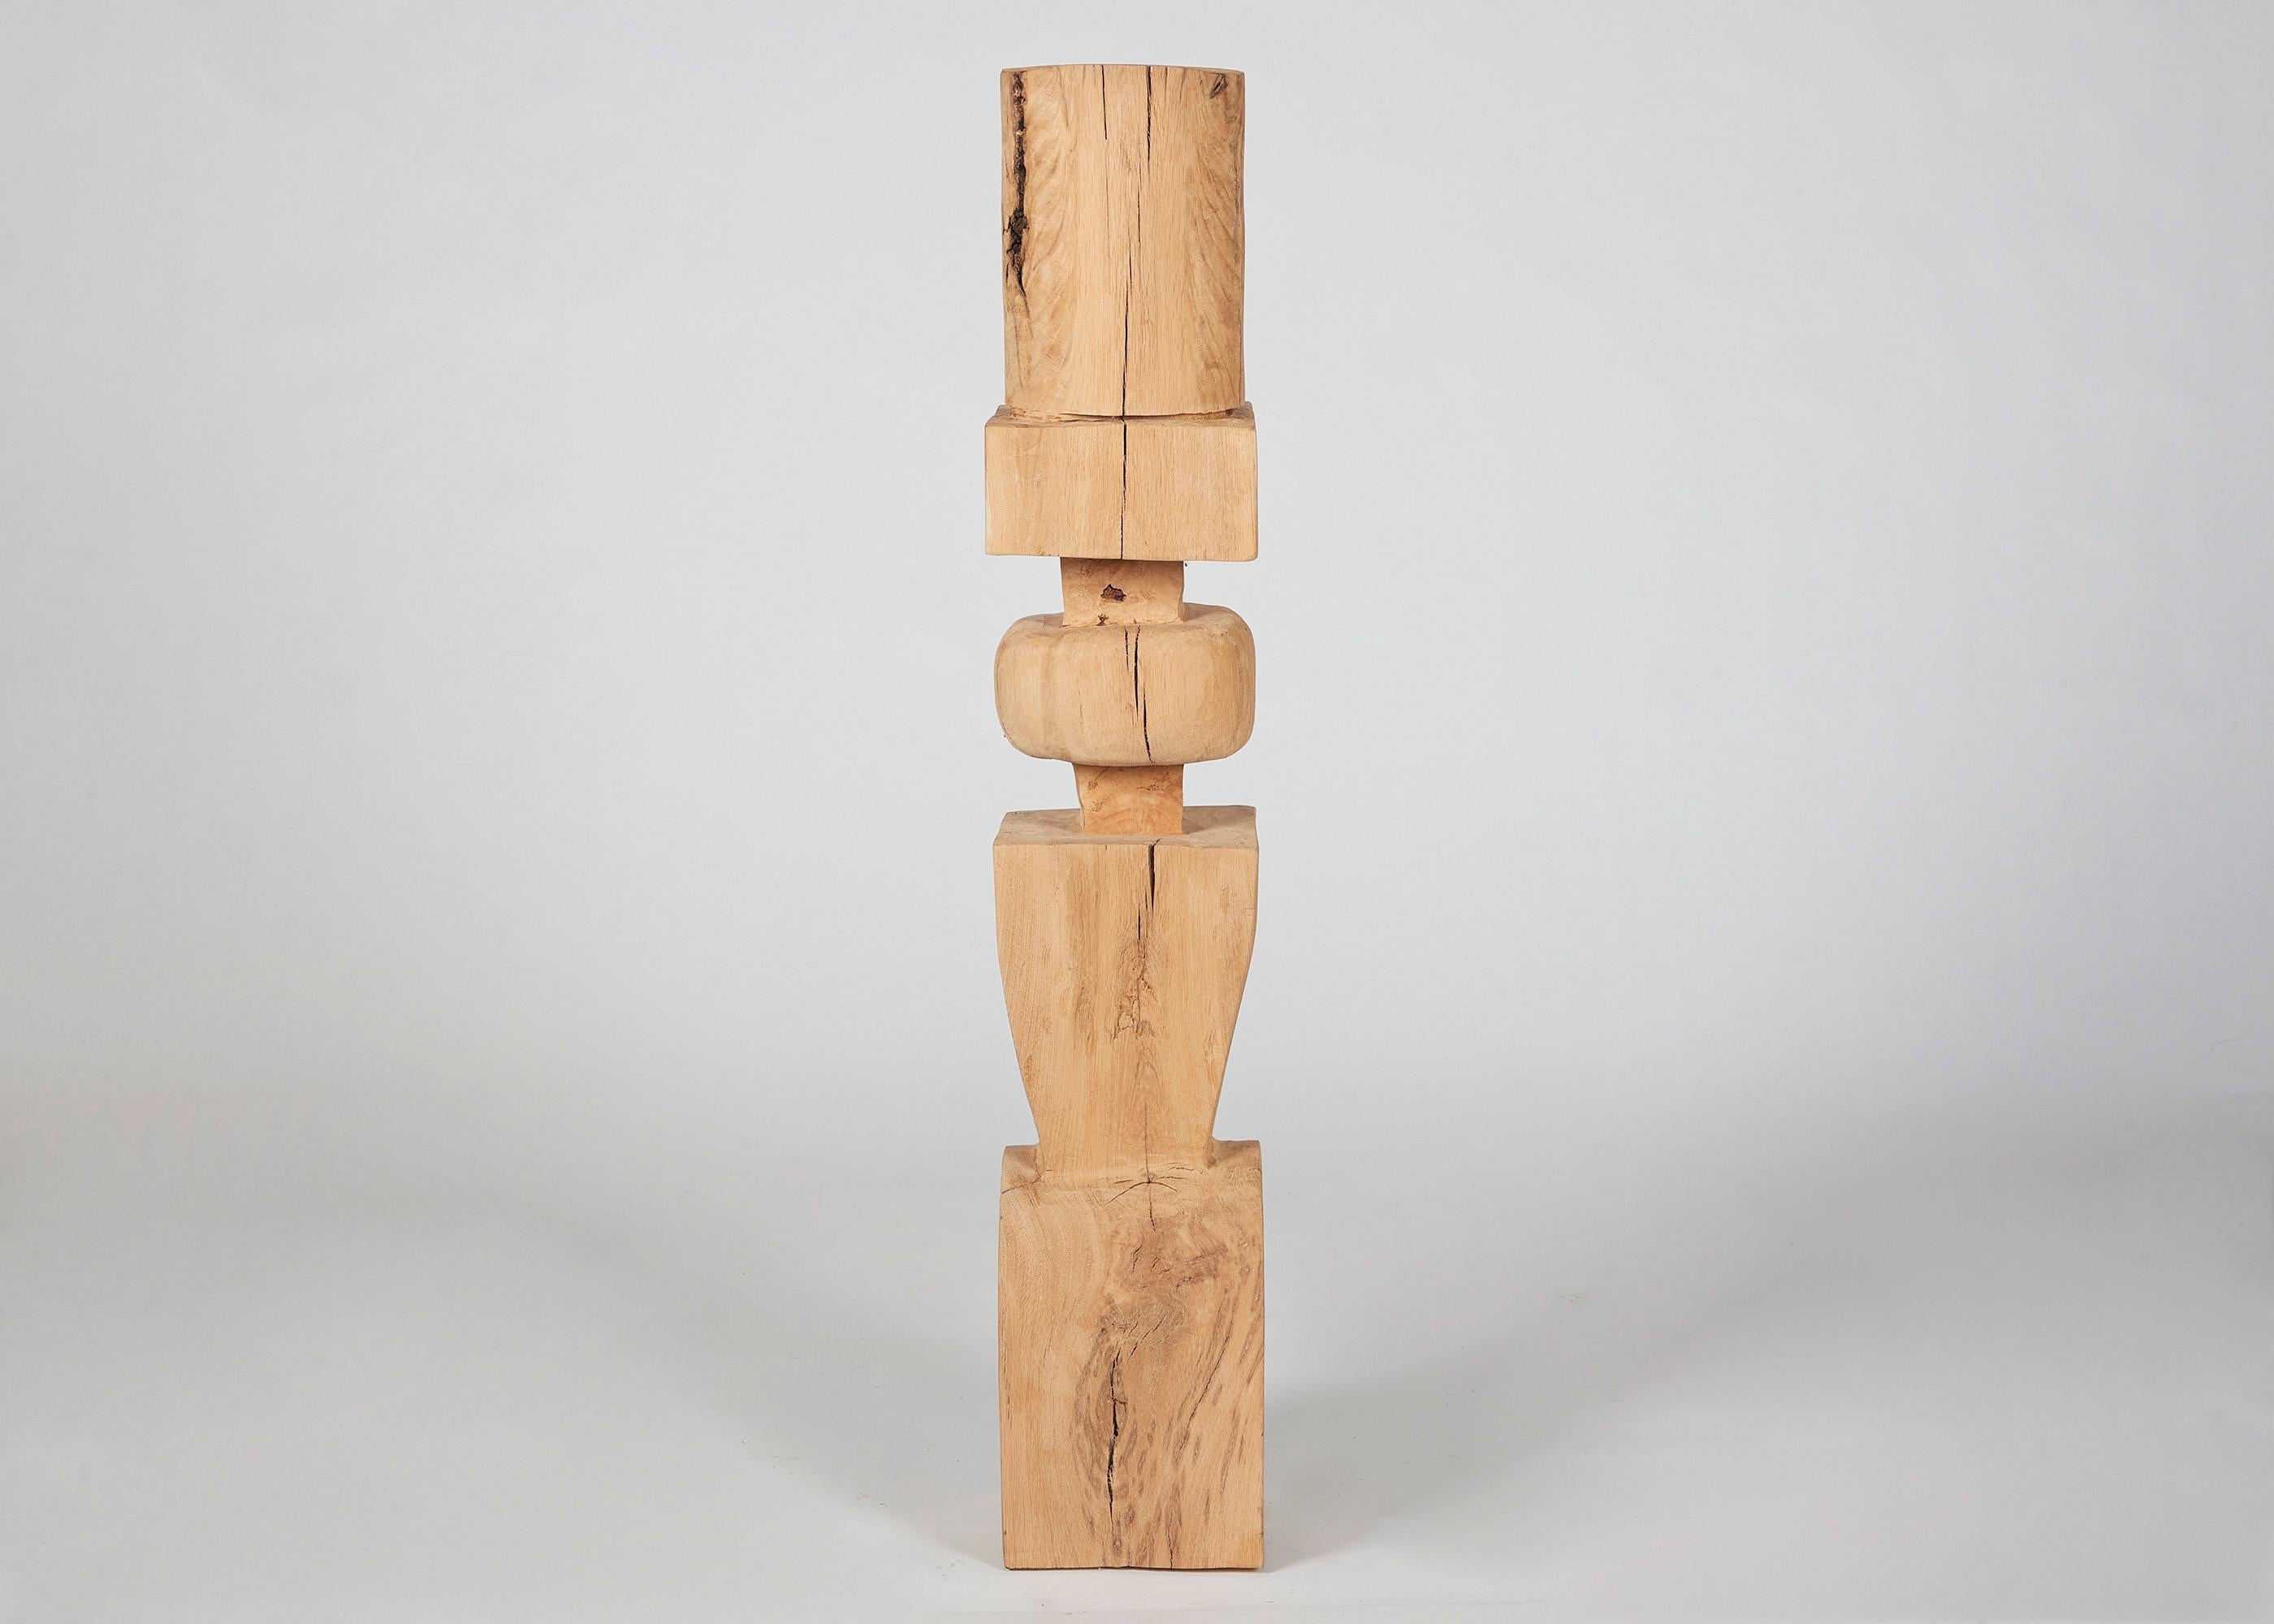 The totems of the French sculptor Franck Evennou possess a playful quality that counterbalances the traditional solemnity of the form. With their rough, splitting surface, they are not merely true in spirit to the wood from which they are carved,